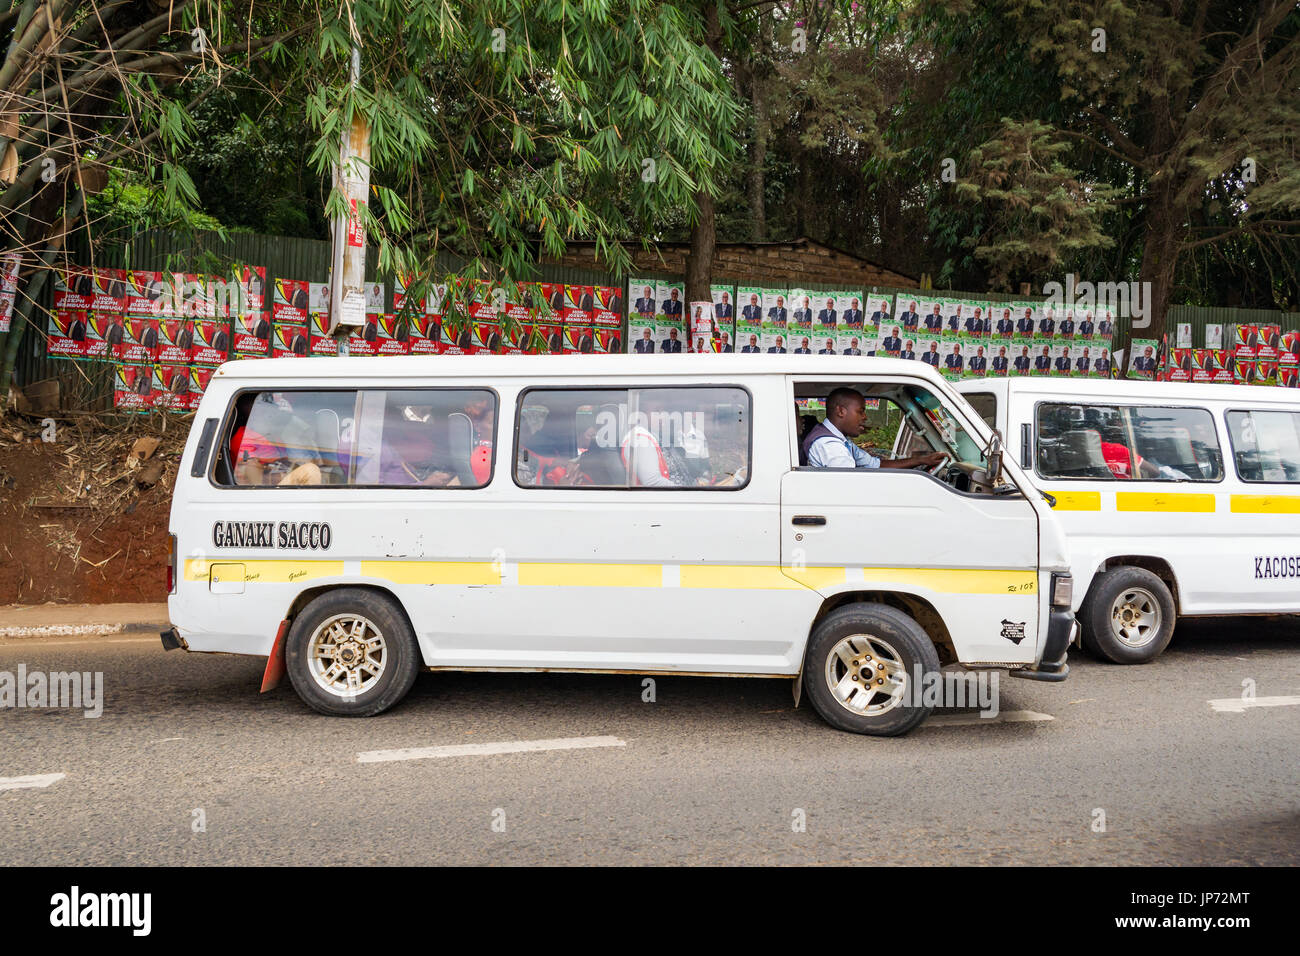 A Matatu Van With Passengers In Front Of A Wall Of Election Posters, Nairobi, Kenya Stock Photo